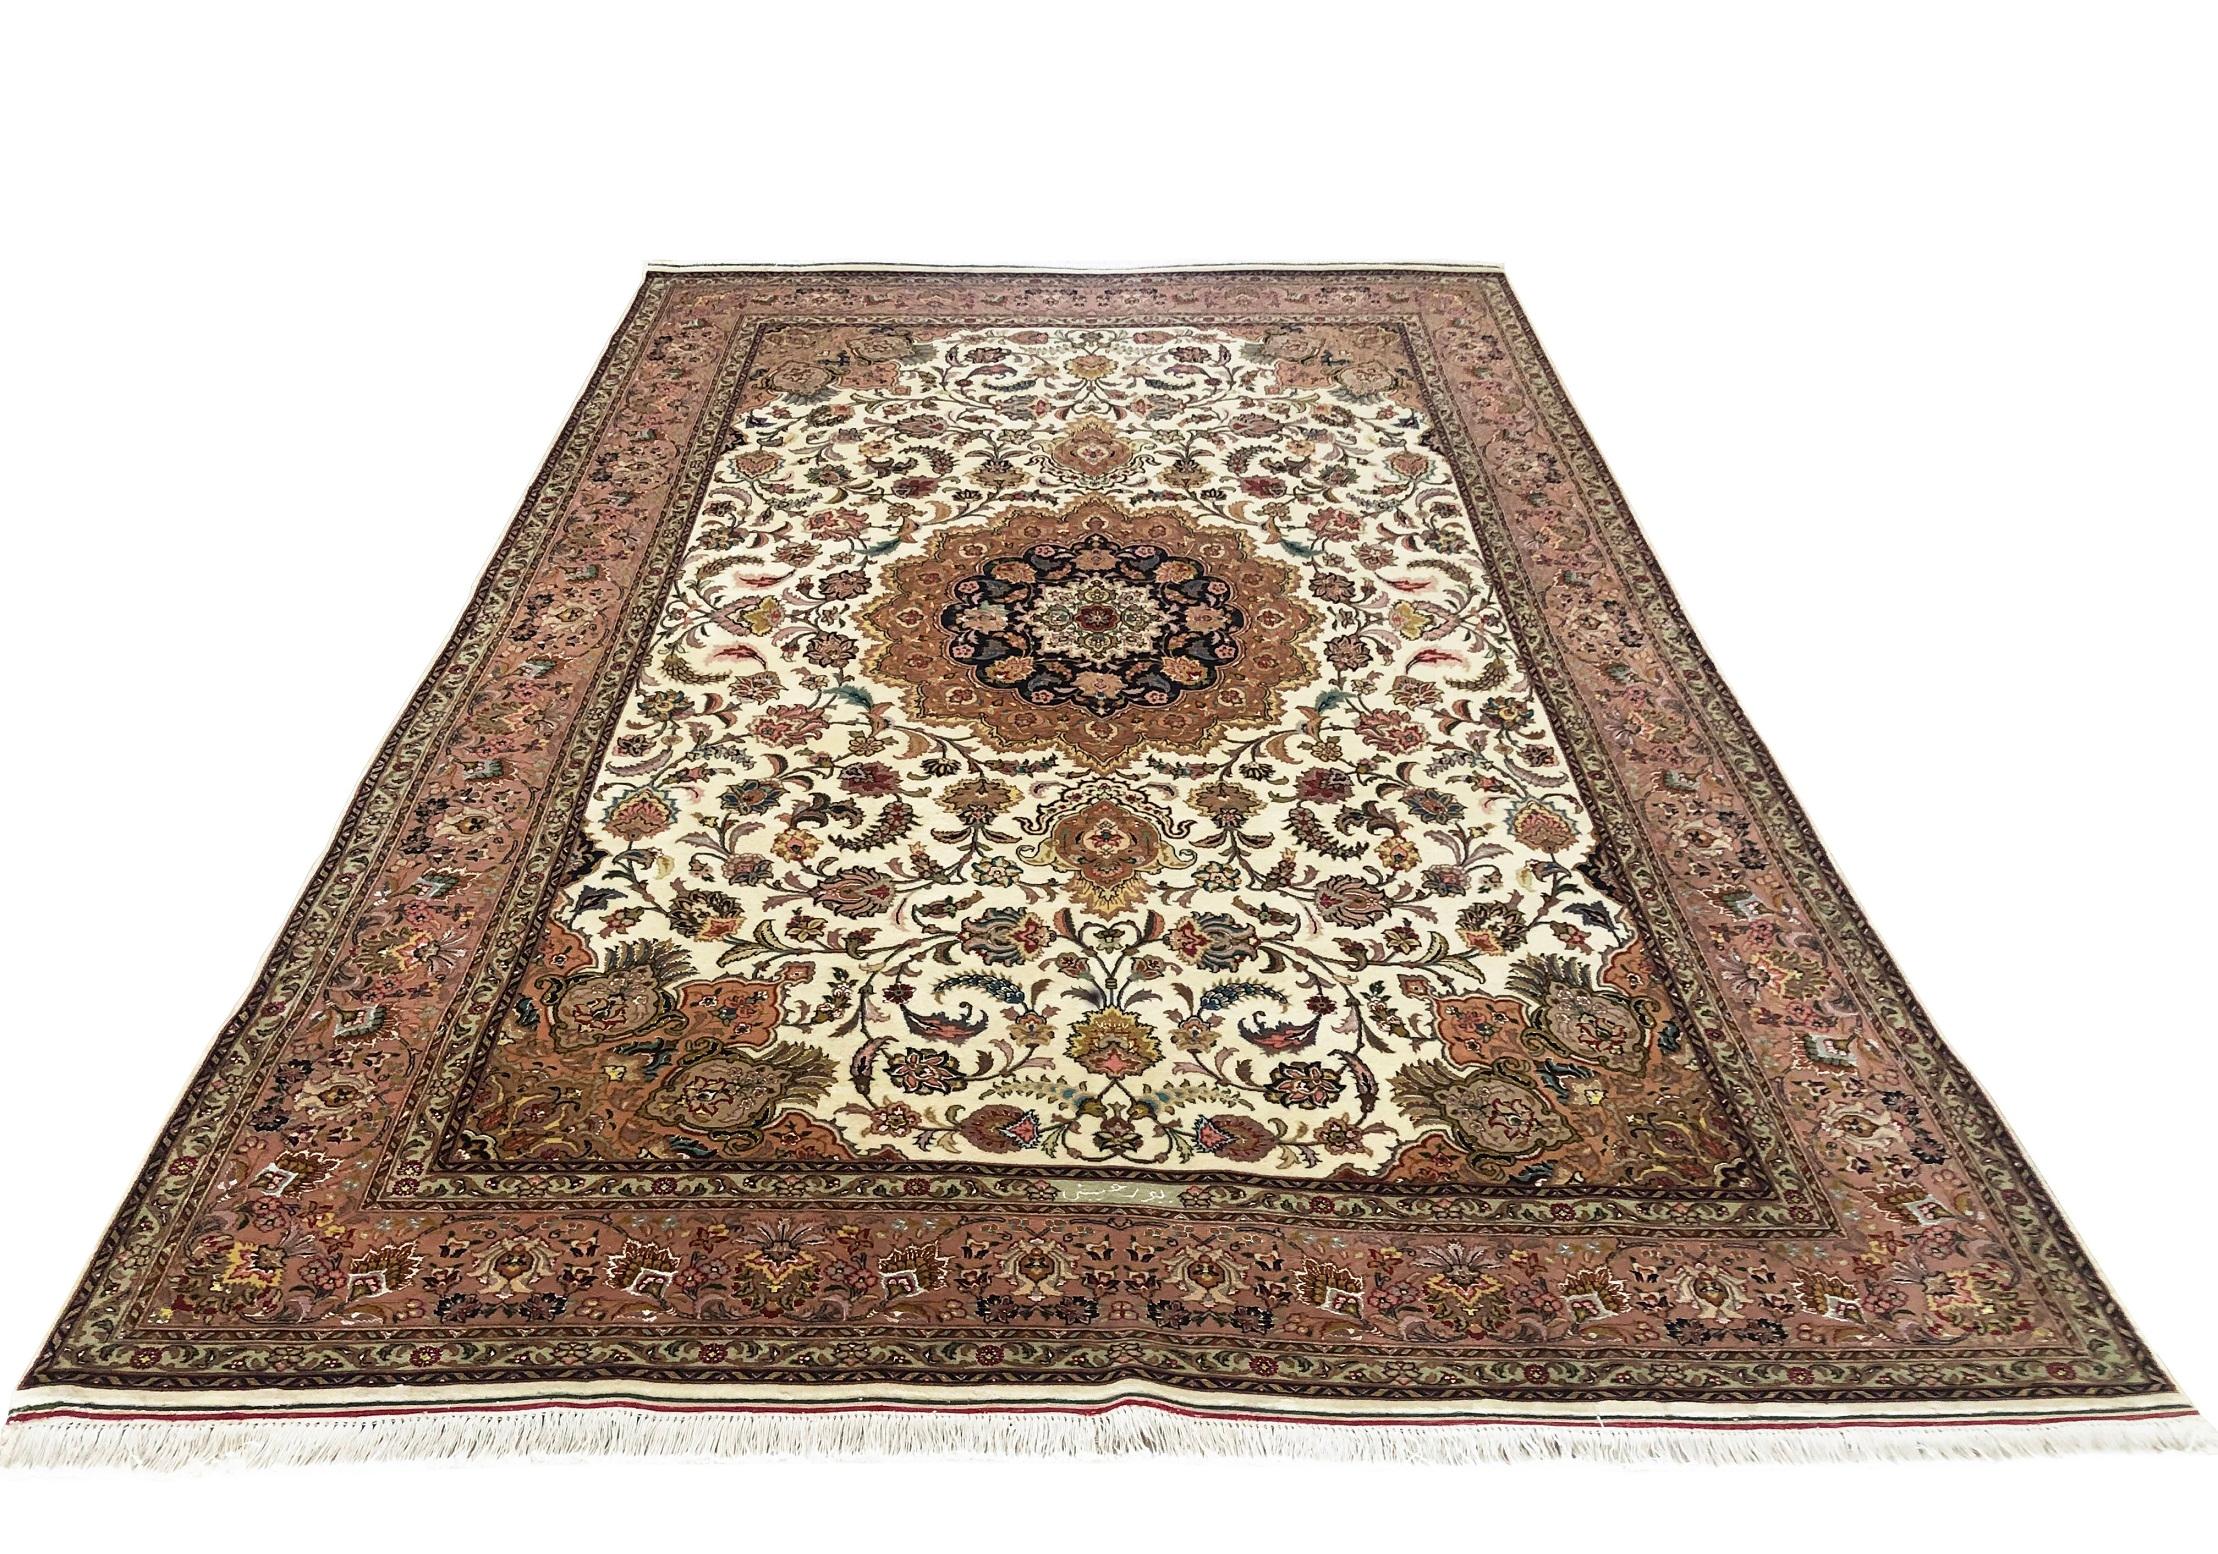 This rug is a hand knotted Persian Tabriz with floral design, signed by Pour Hosseini. The pile is wool and silk with cotton foundation. The size is 6 feet 6 inches wide by feet 9 feet 9 inches tall. The base color is cream and the border is mauve